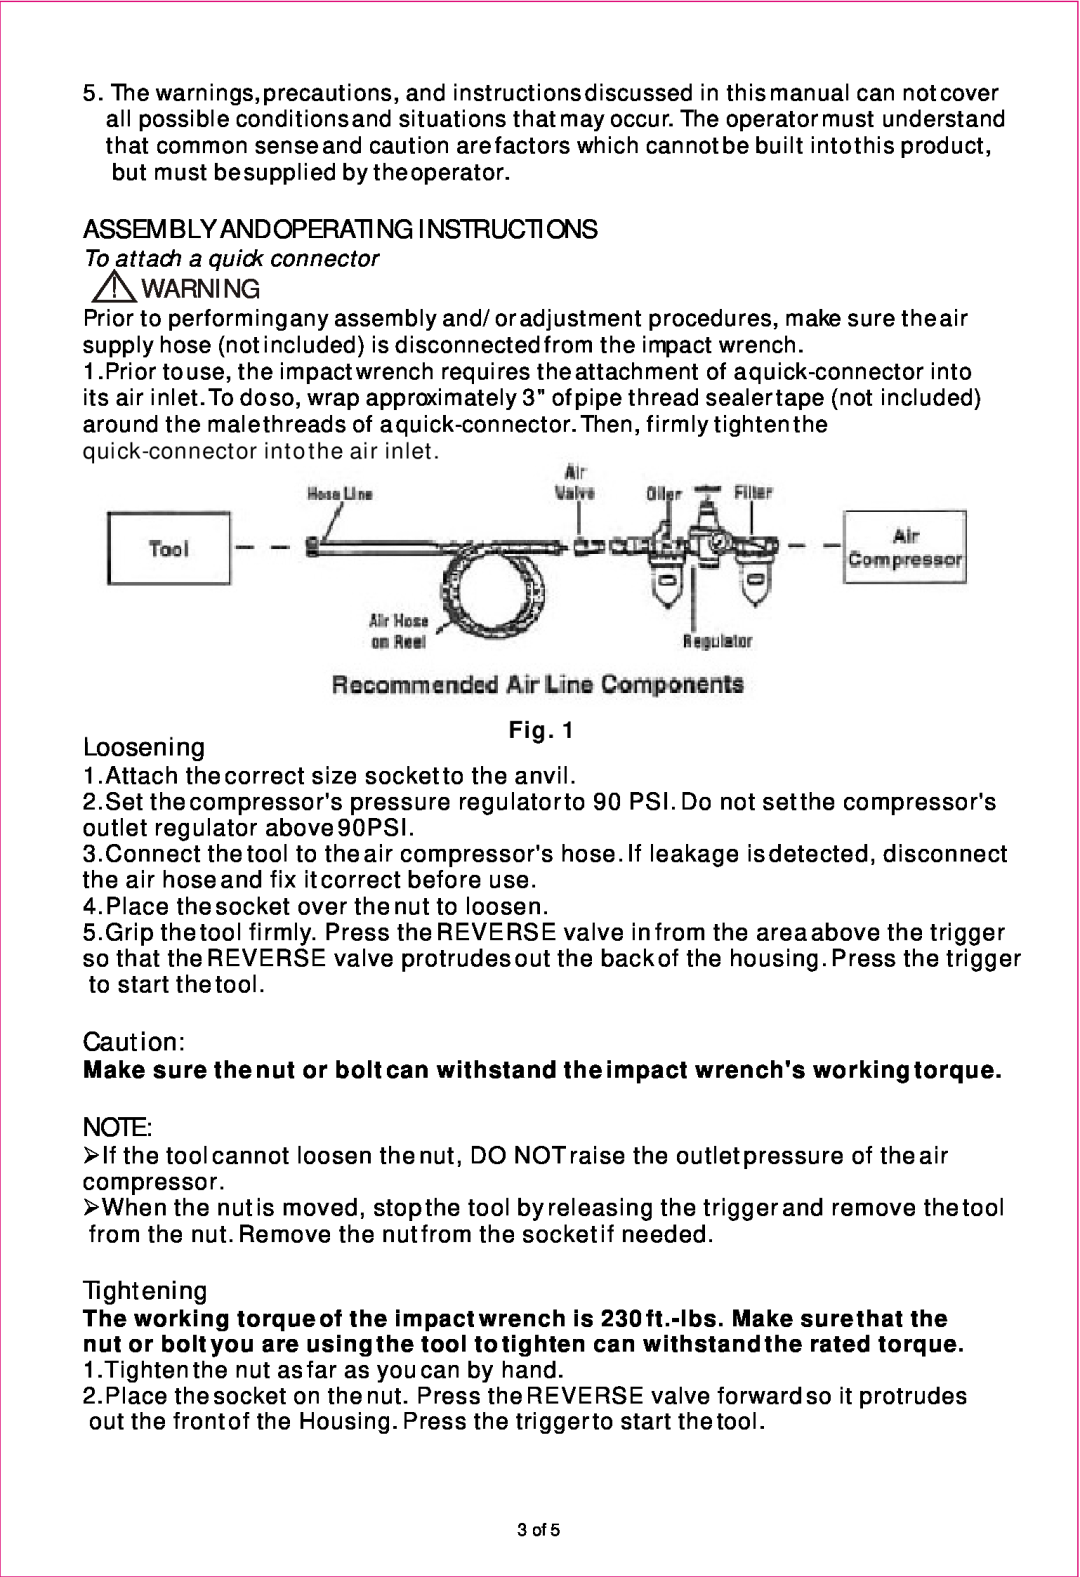 Northern Industrial Tools 1981202 Assembly And Operating Instructions, Loosening, Tightening, To attach a quick connector 